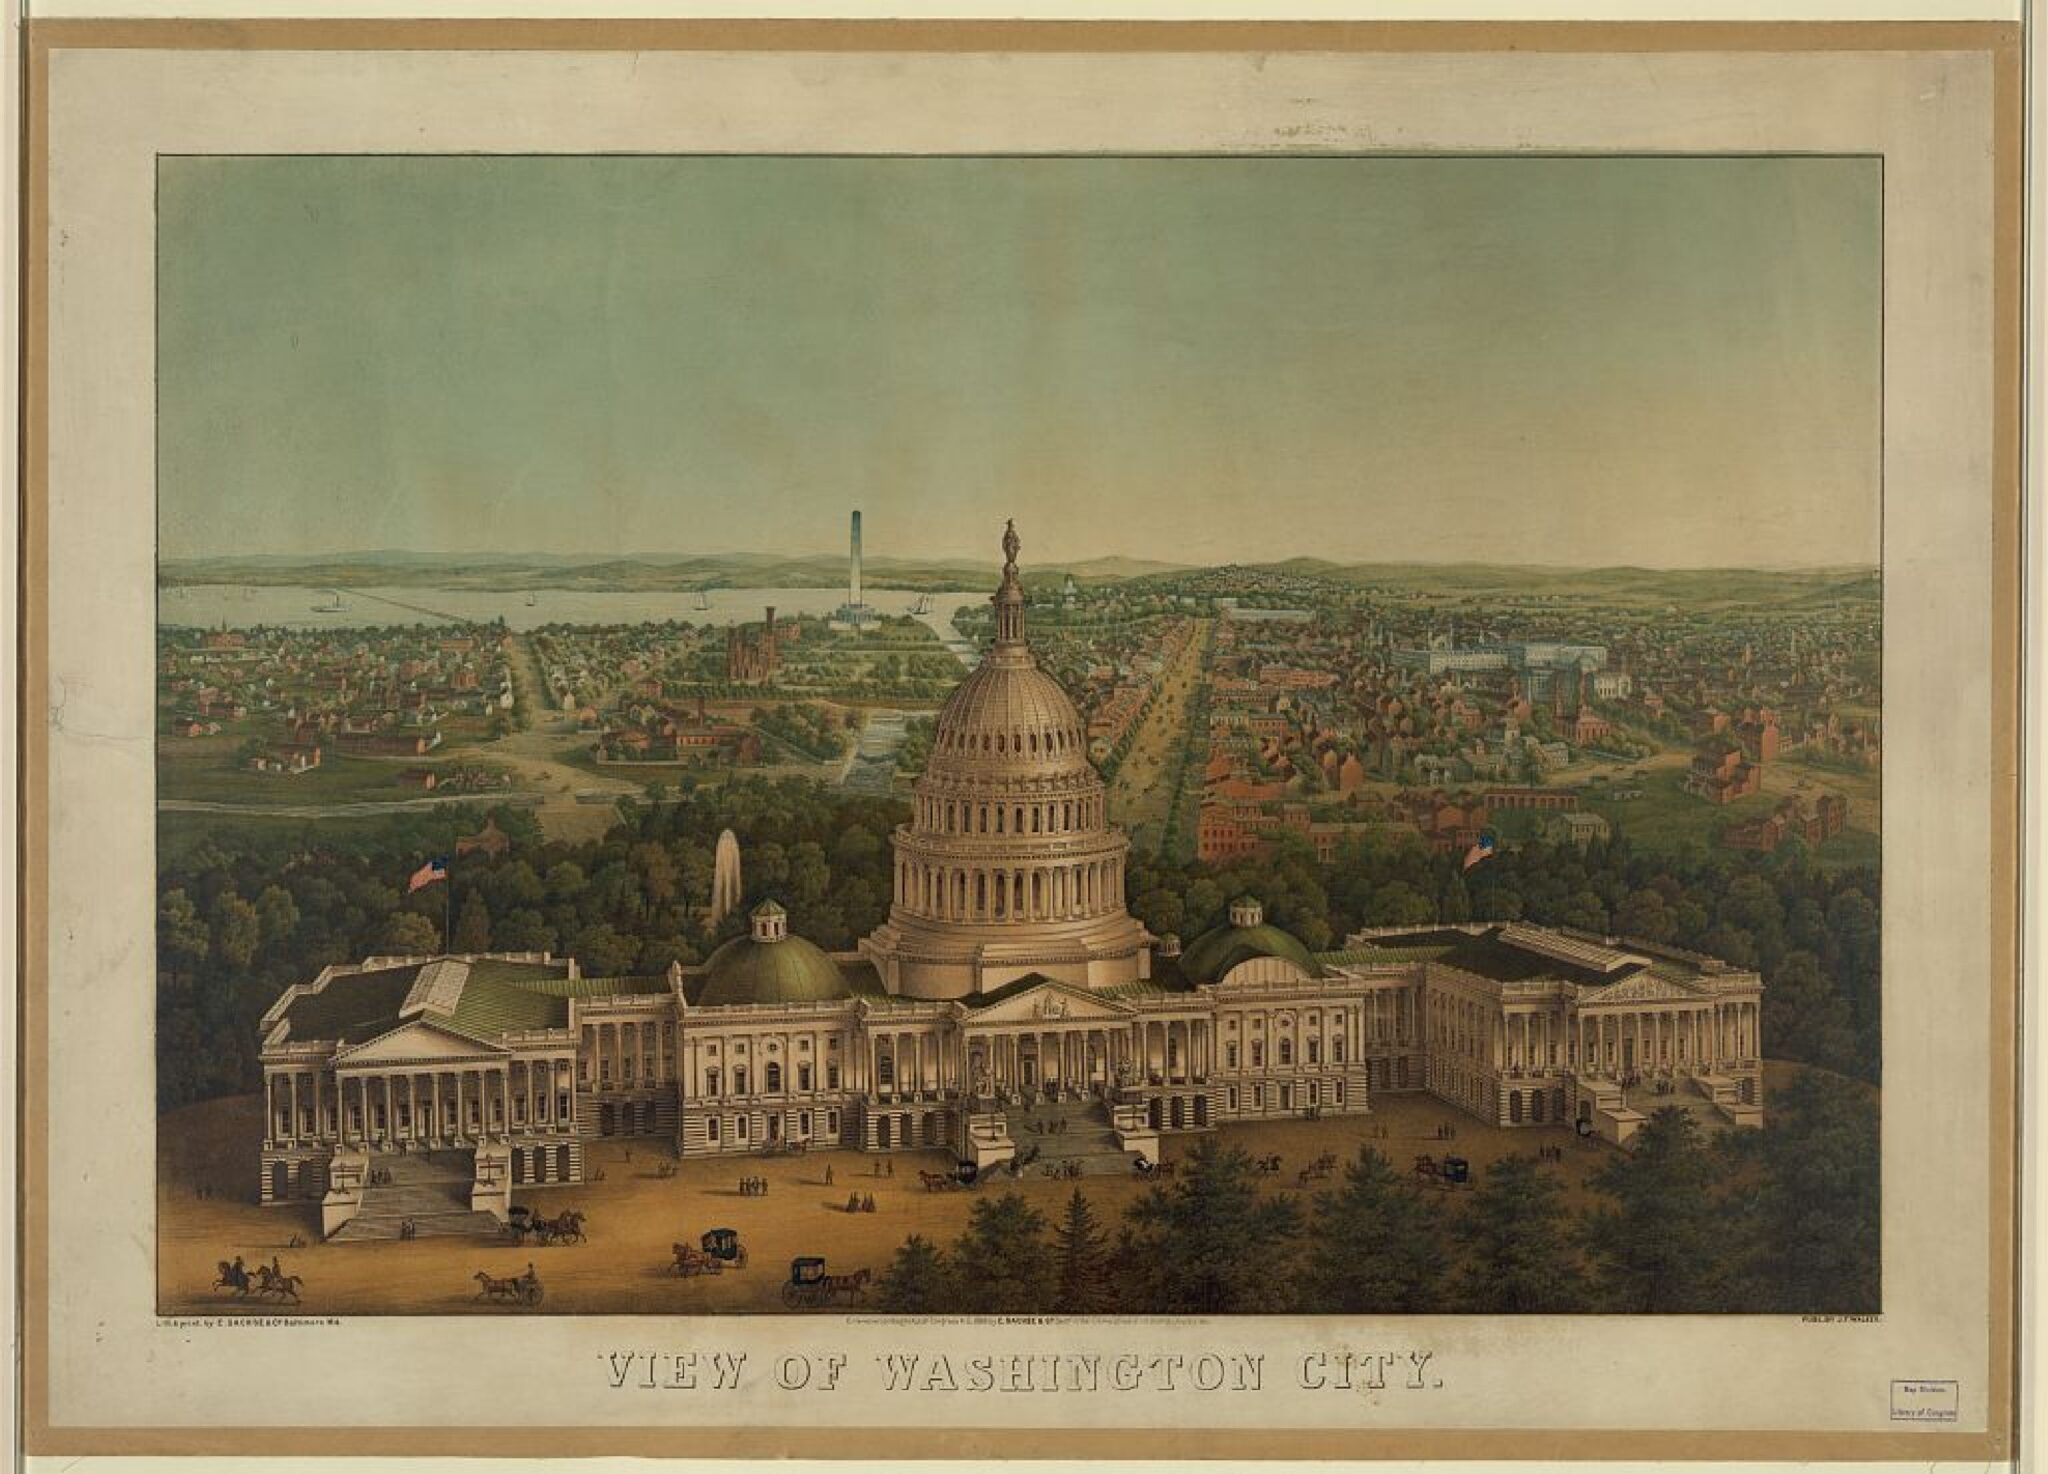 Print showing a bird's-eye view of Washington, D.C., with the U.S. Capitol in the foreground, and the Washington Monument in the background.